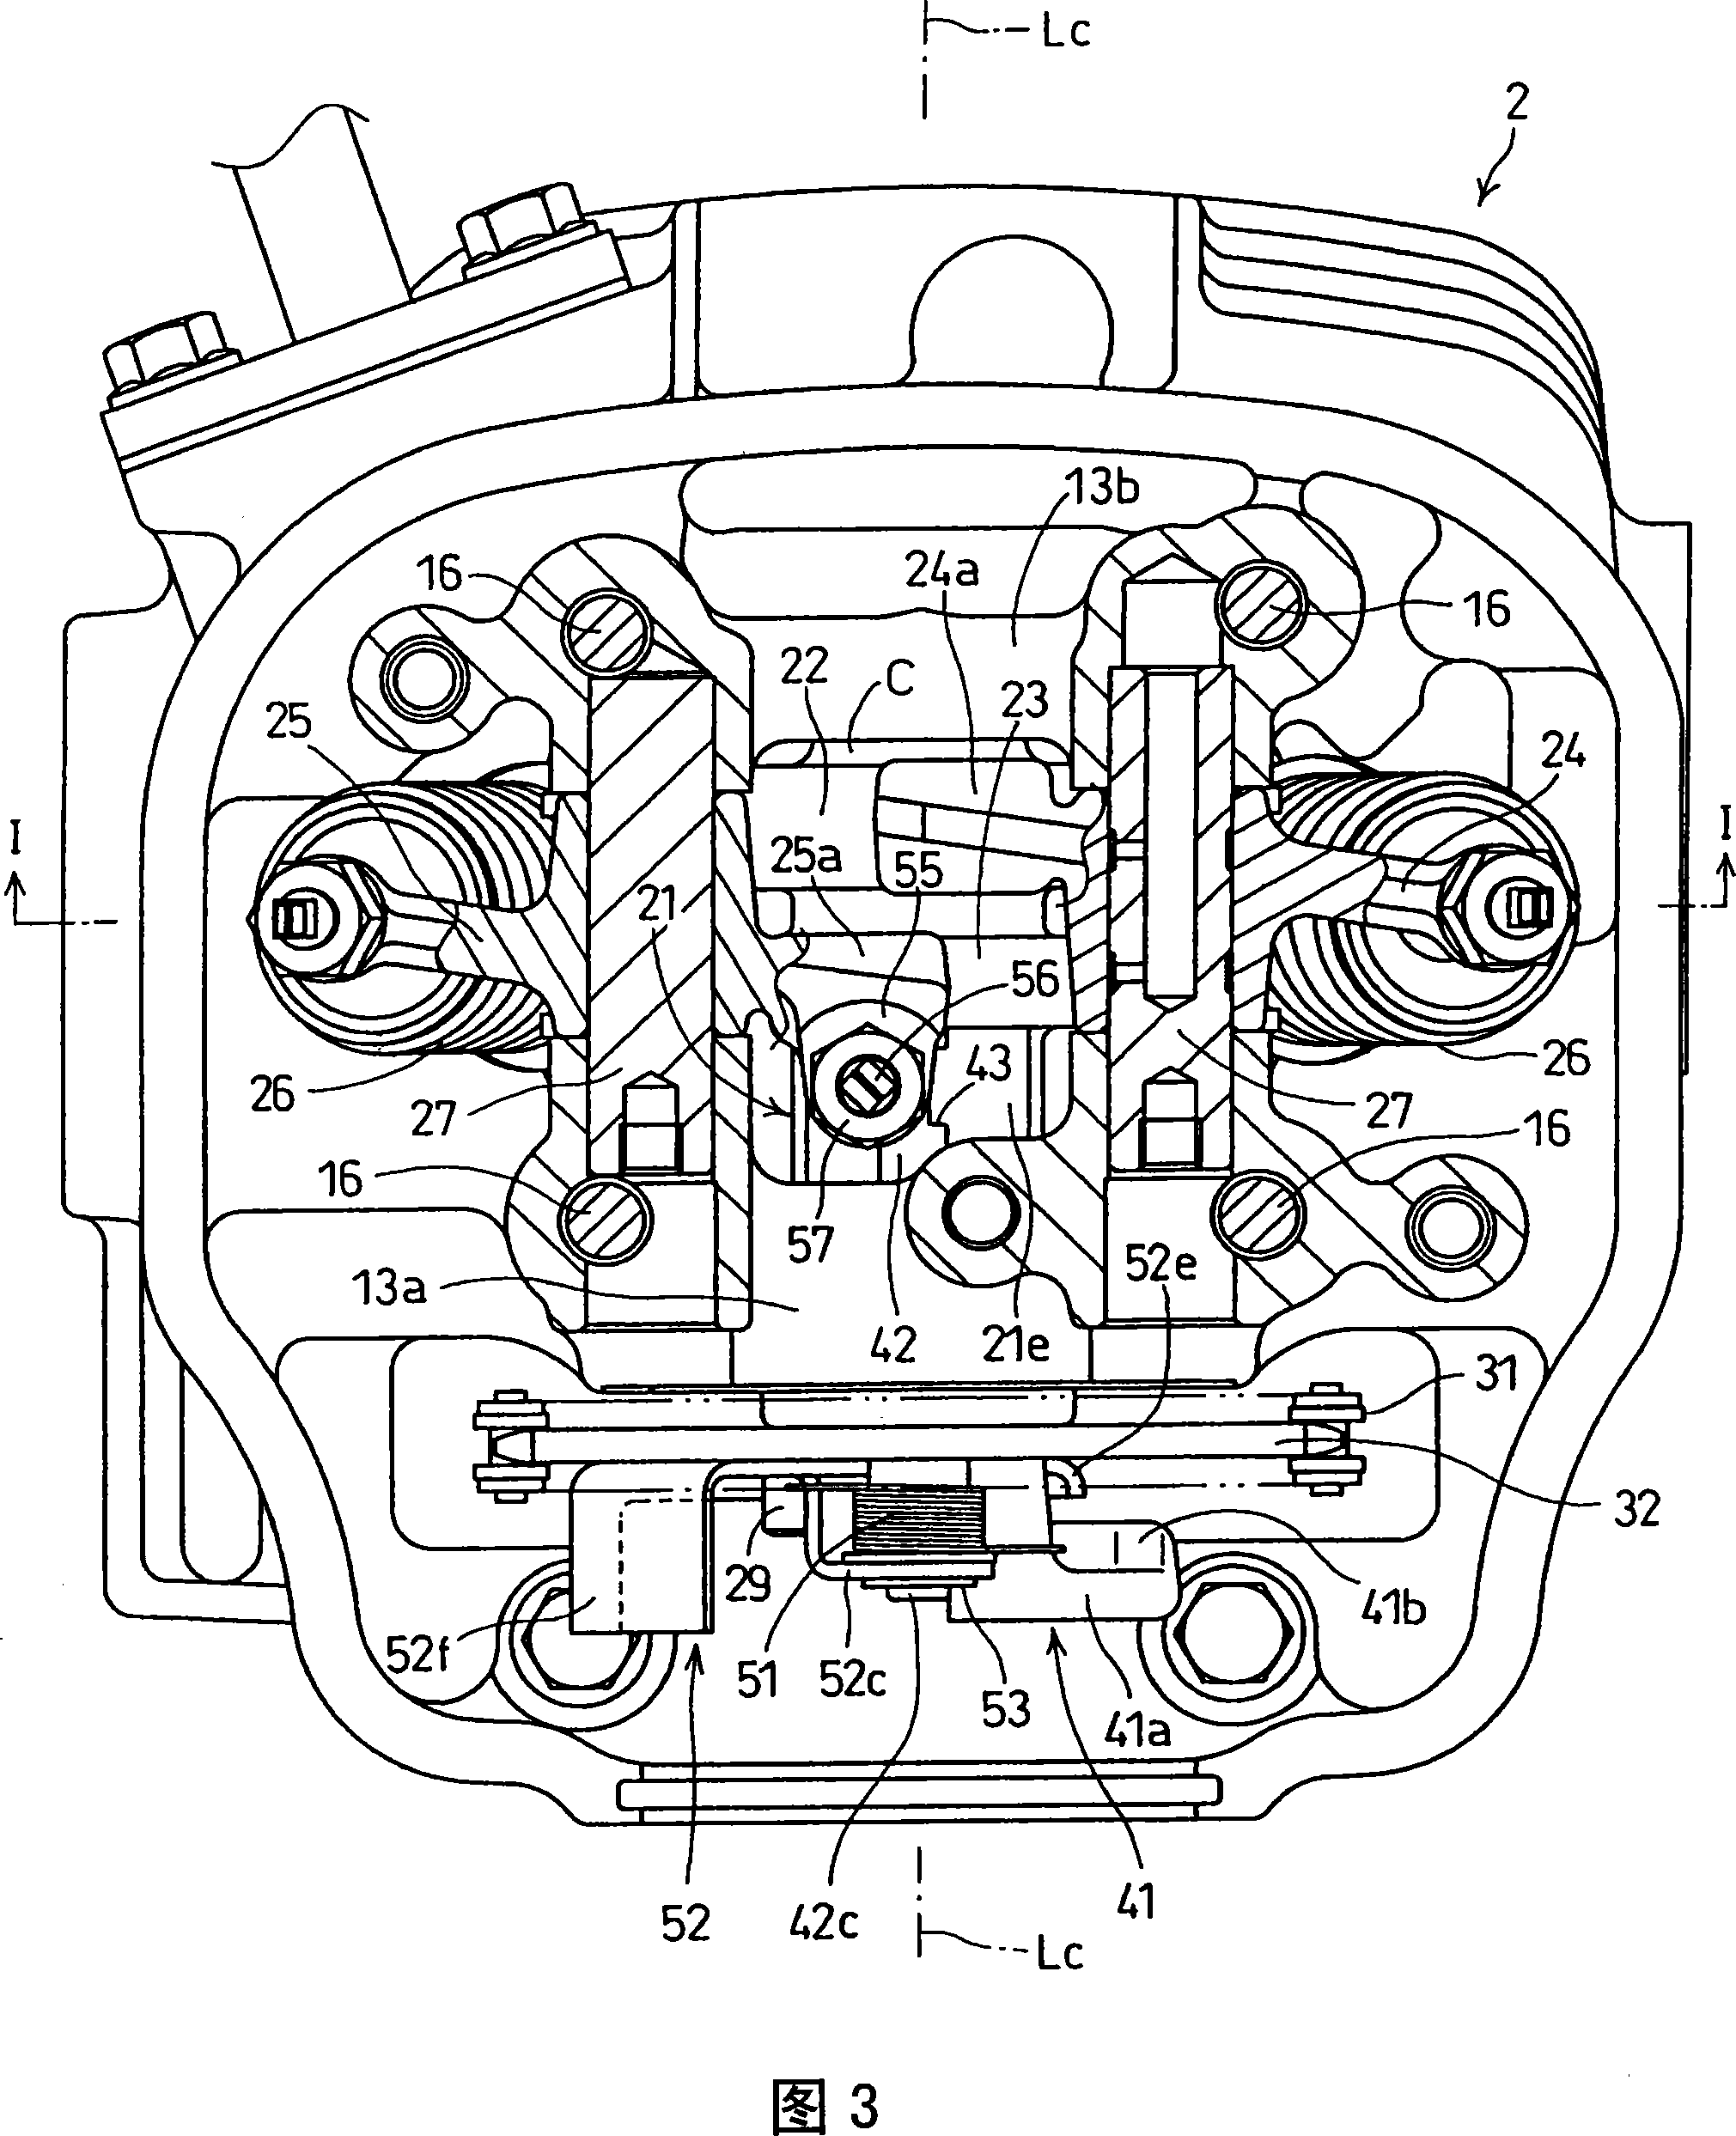 Internal-combustion engine with decompressor